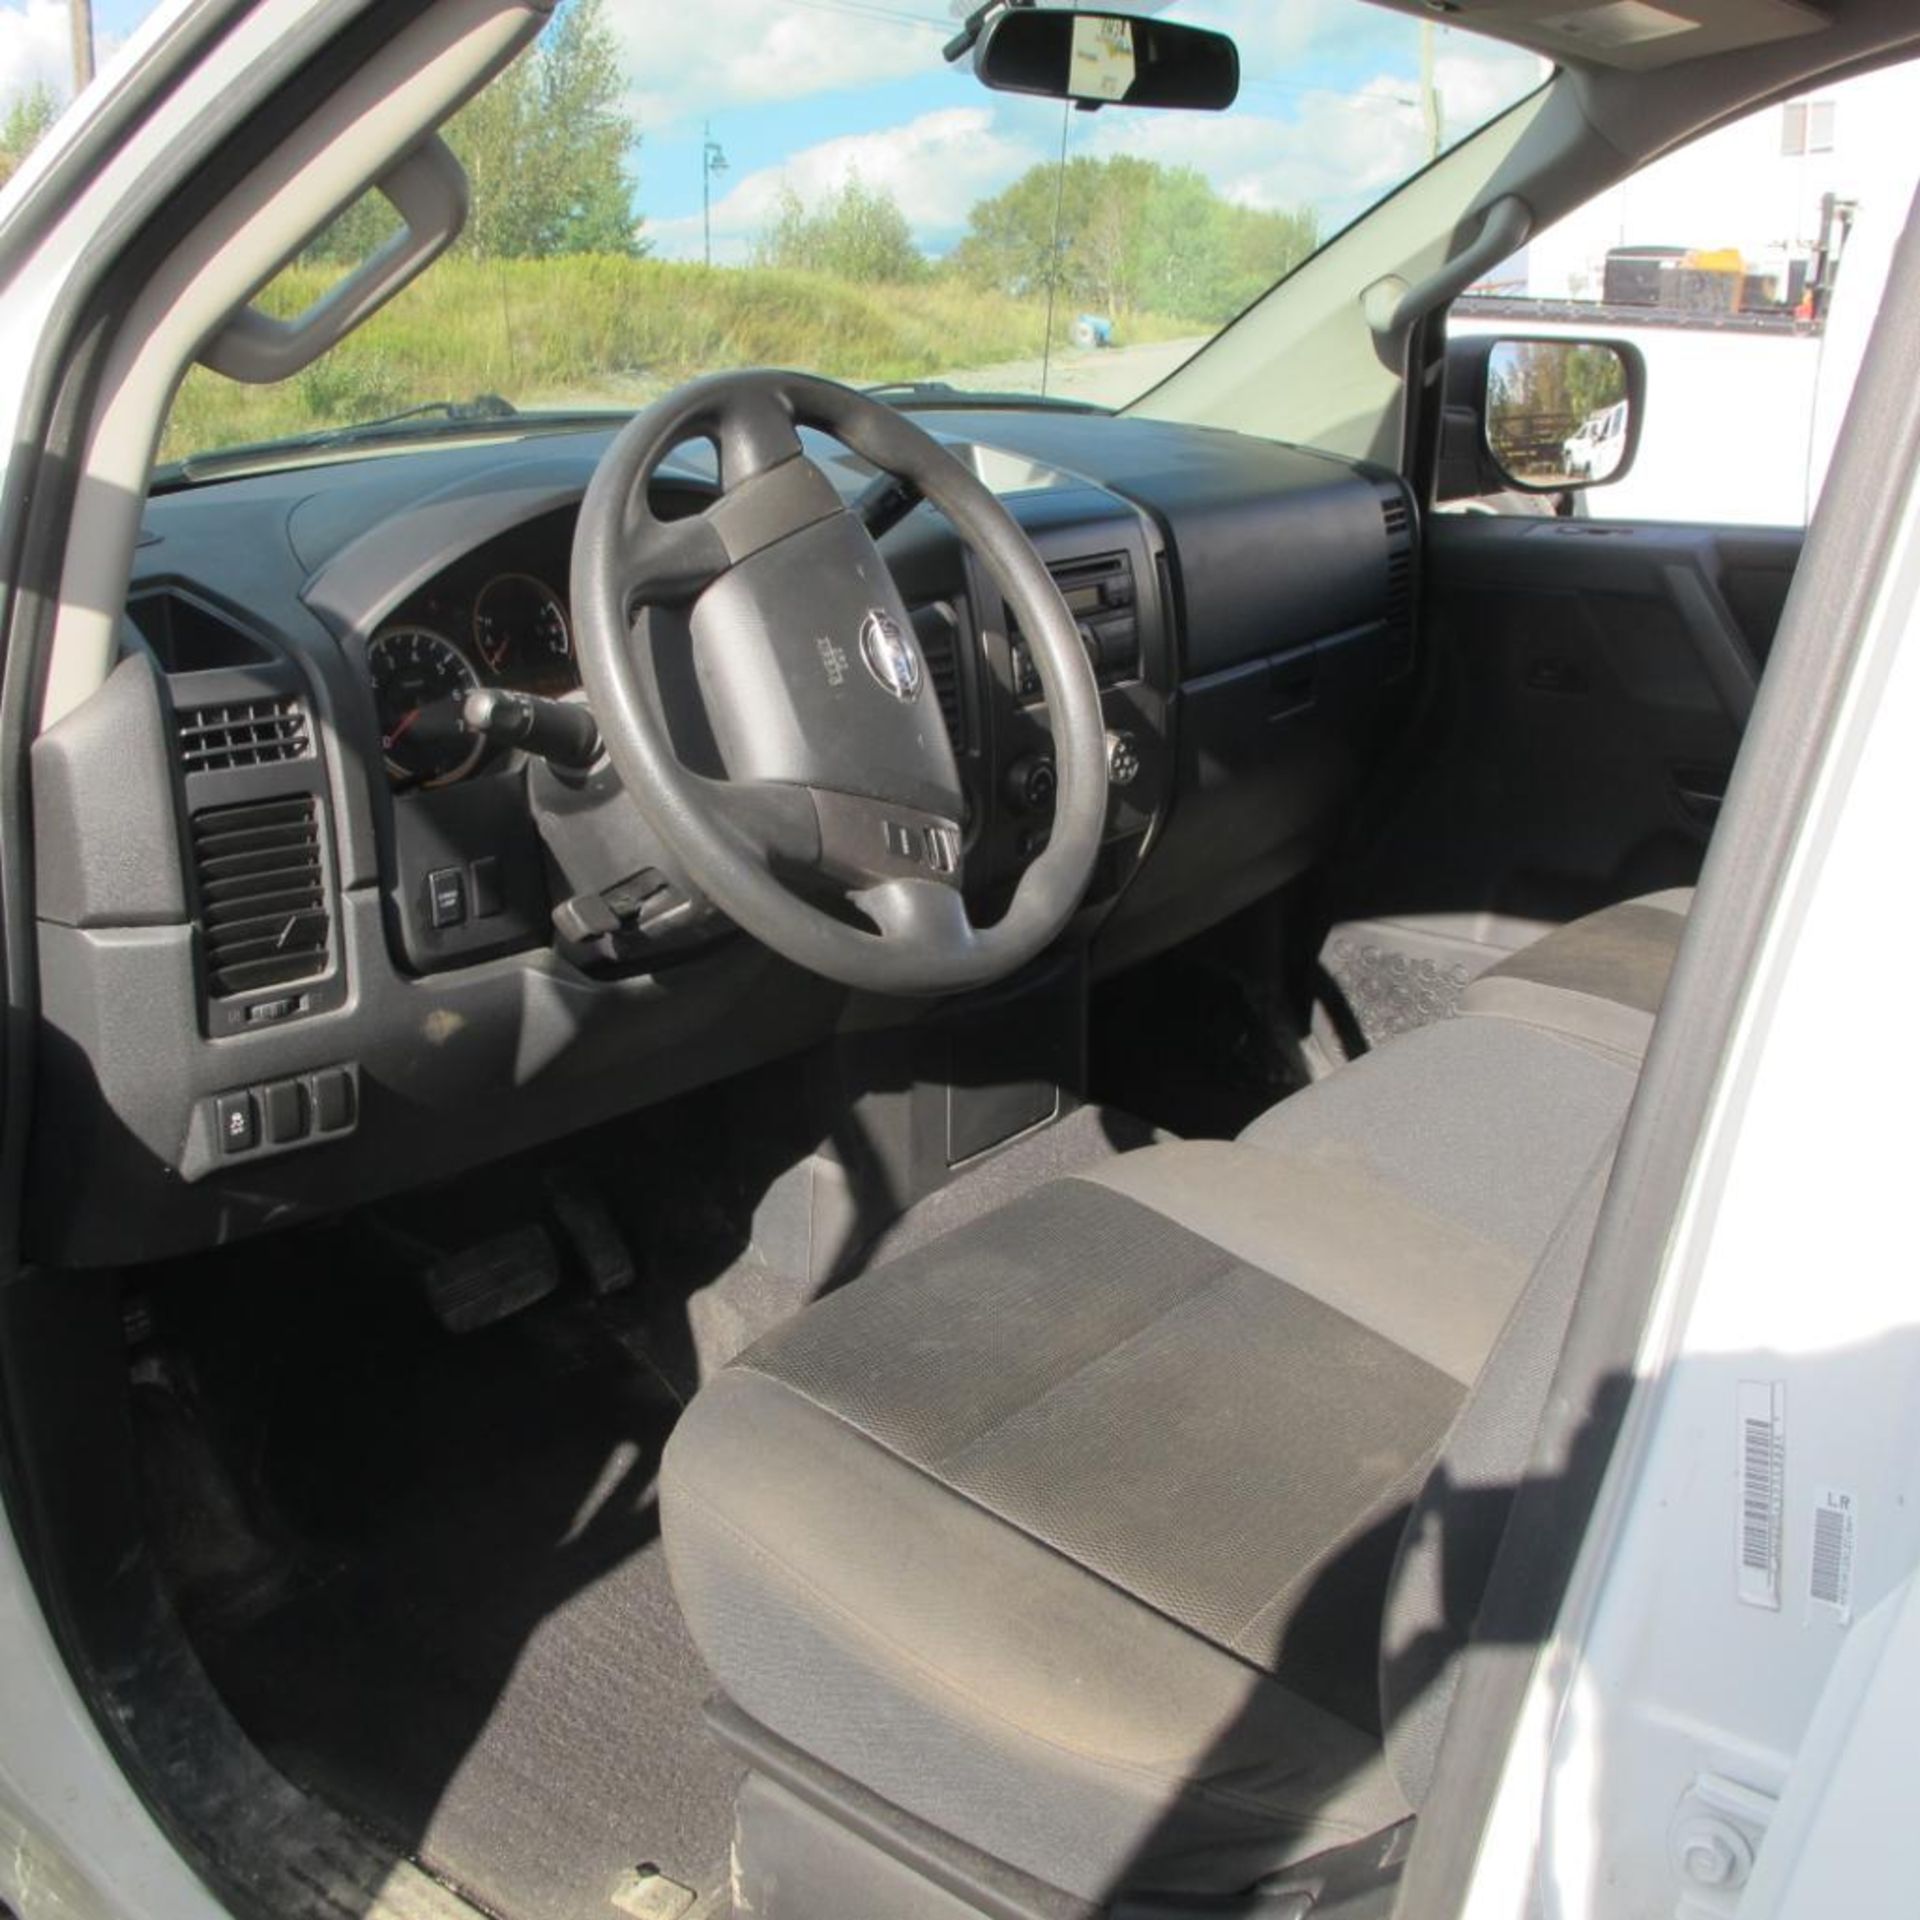 2013 NISSAN TITAN CREW CAB, 92574 KM INDICATED, 4X4, 5.6L, V-8, INCLUDES SUMMER TIRES ON RIMS, 1N6AA - Image 9 of 13